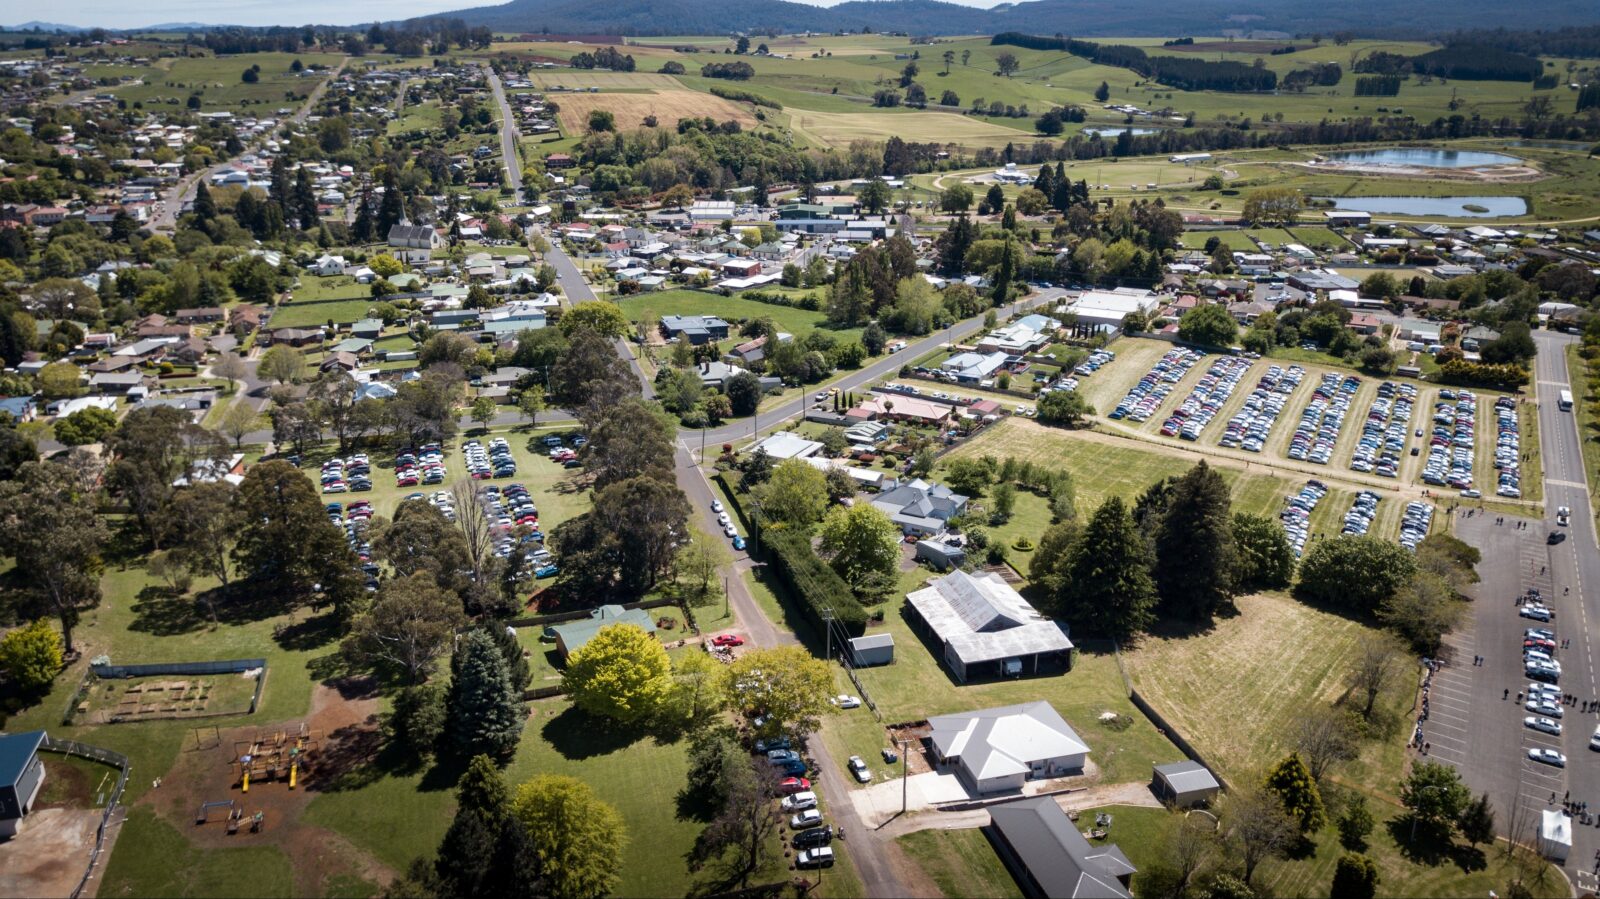 Aerial view of the venues displaying all types of craft. Linked by free shuttle bus.